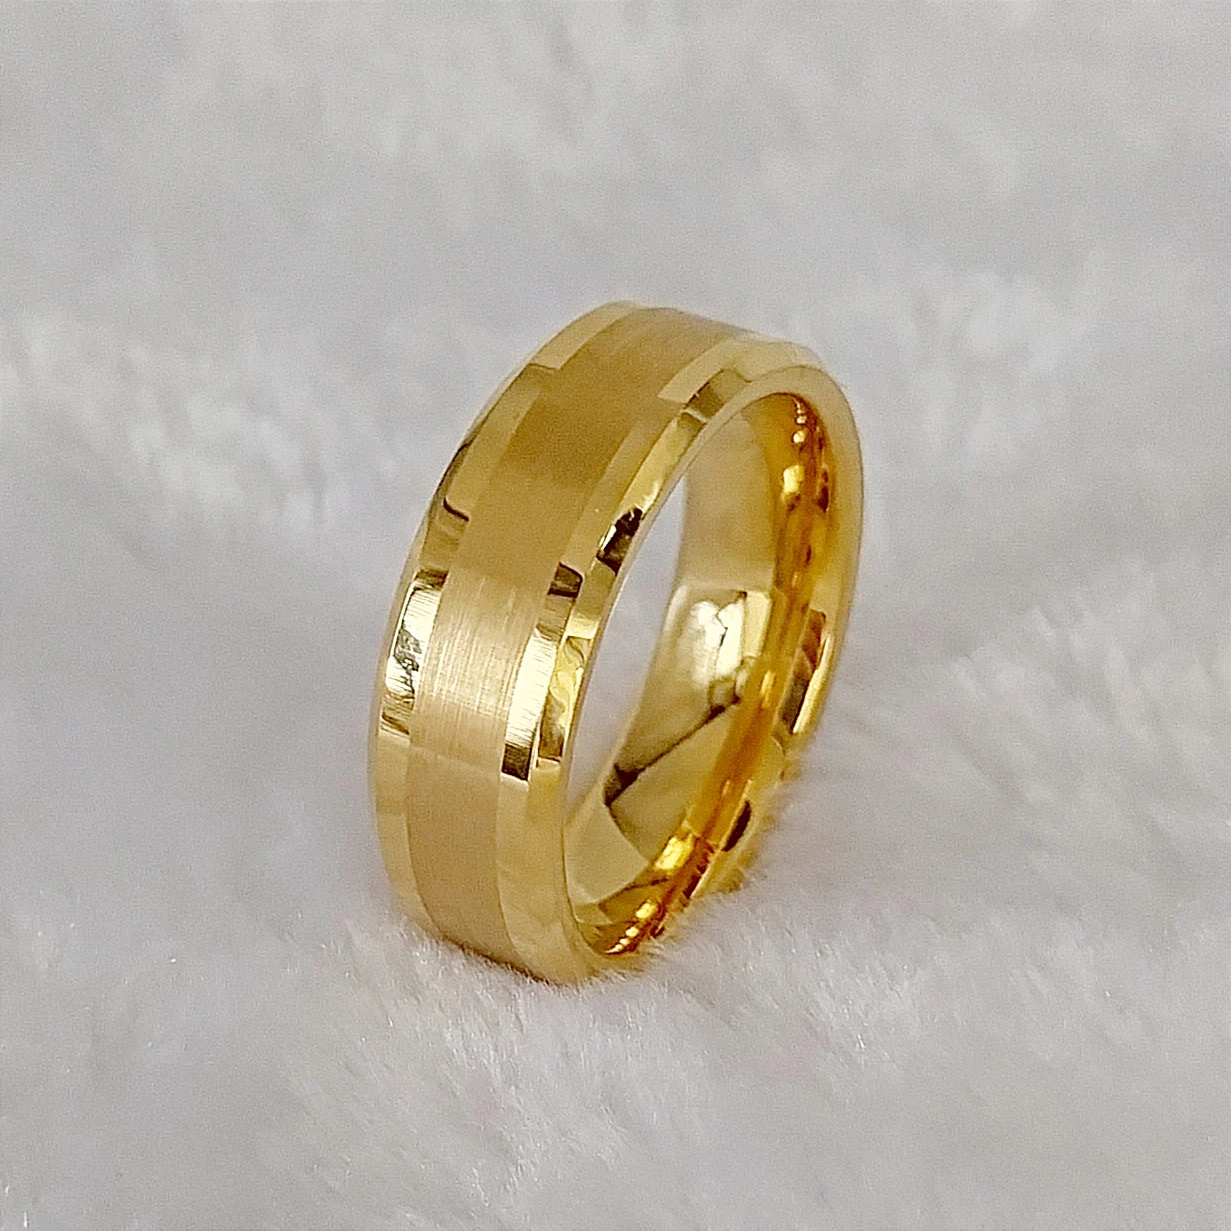 Two-Tone Ridged Edge 14K Gold Ion Plated Ring with Soft Brush Finish Stainless Steel Band. Couple Ring